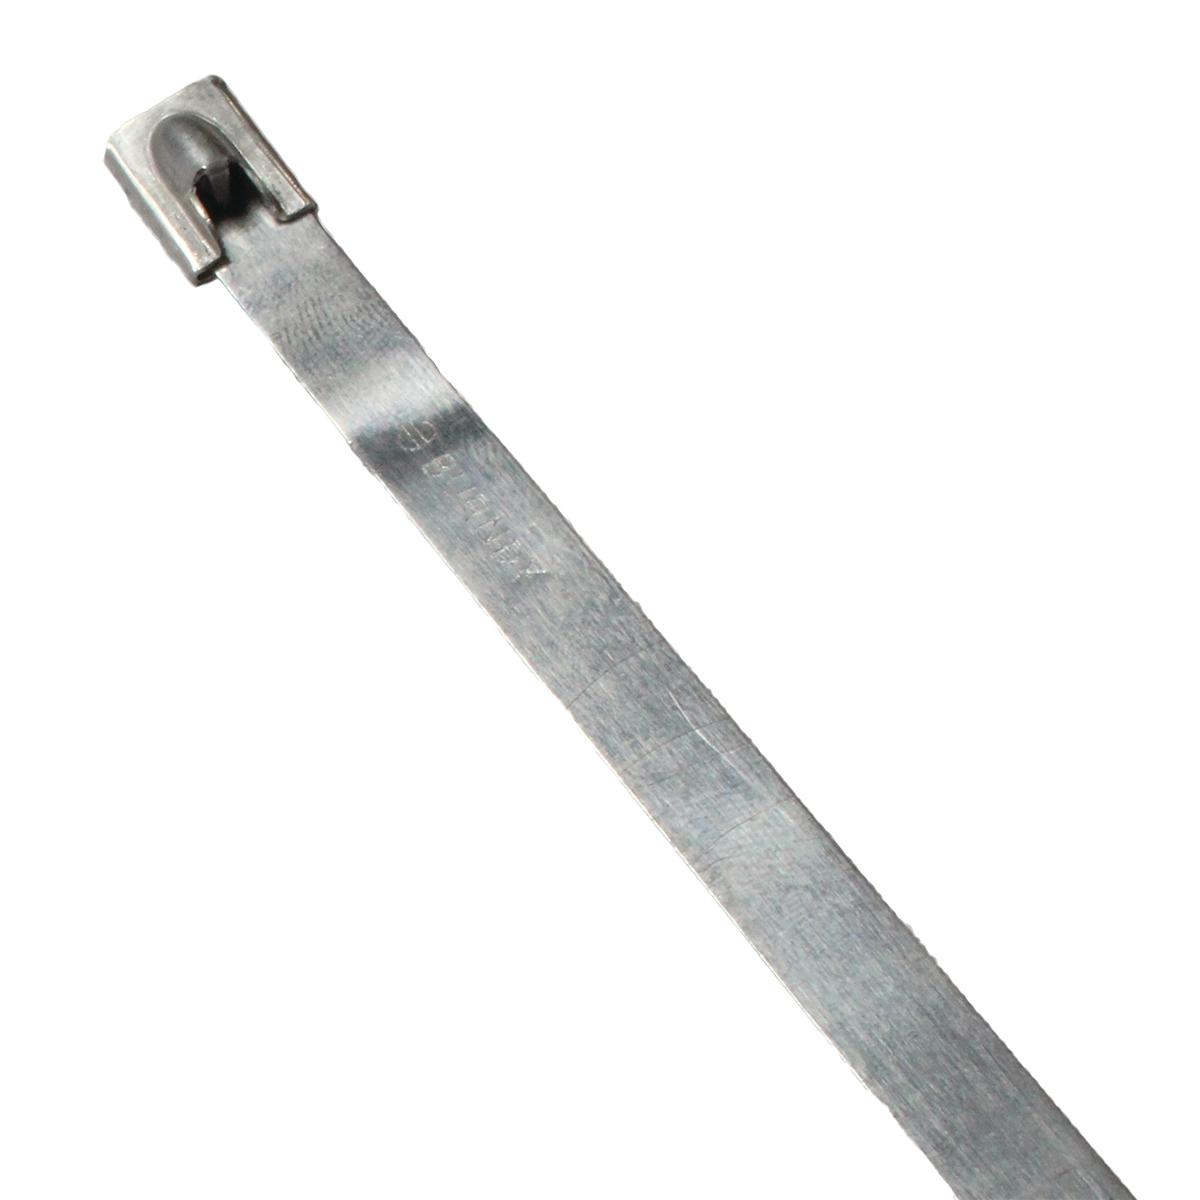 Hubbell CTSS500750304L Uncoated stainless steel cable ties 304 grade, Tensile strength: 500 Lb, 31.50" L, 0.31" W, 7.60" Bundle Dia.  ; Smooth, rounded edges help ensure safe, efficient handling ; Ergonomically designed installation tools consistently tensions and cuts off ties